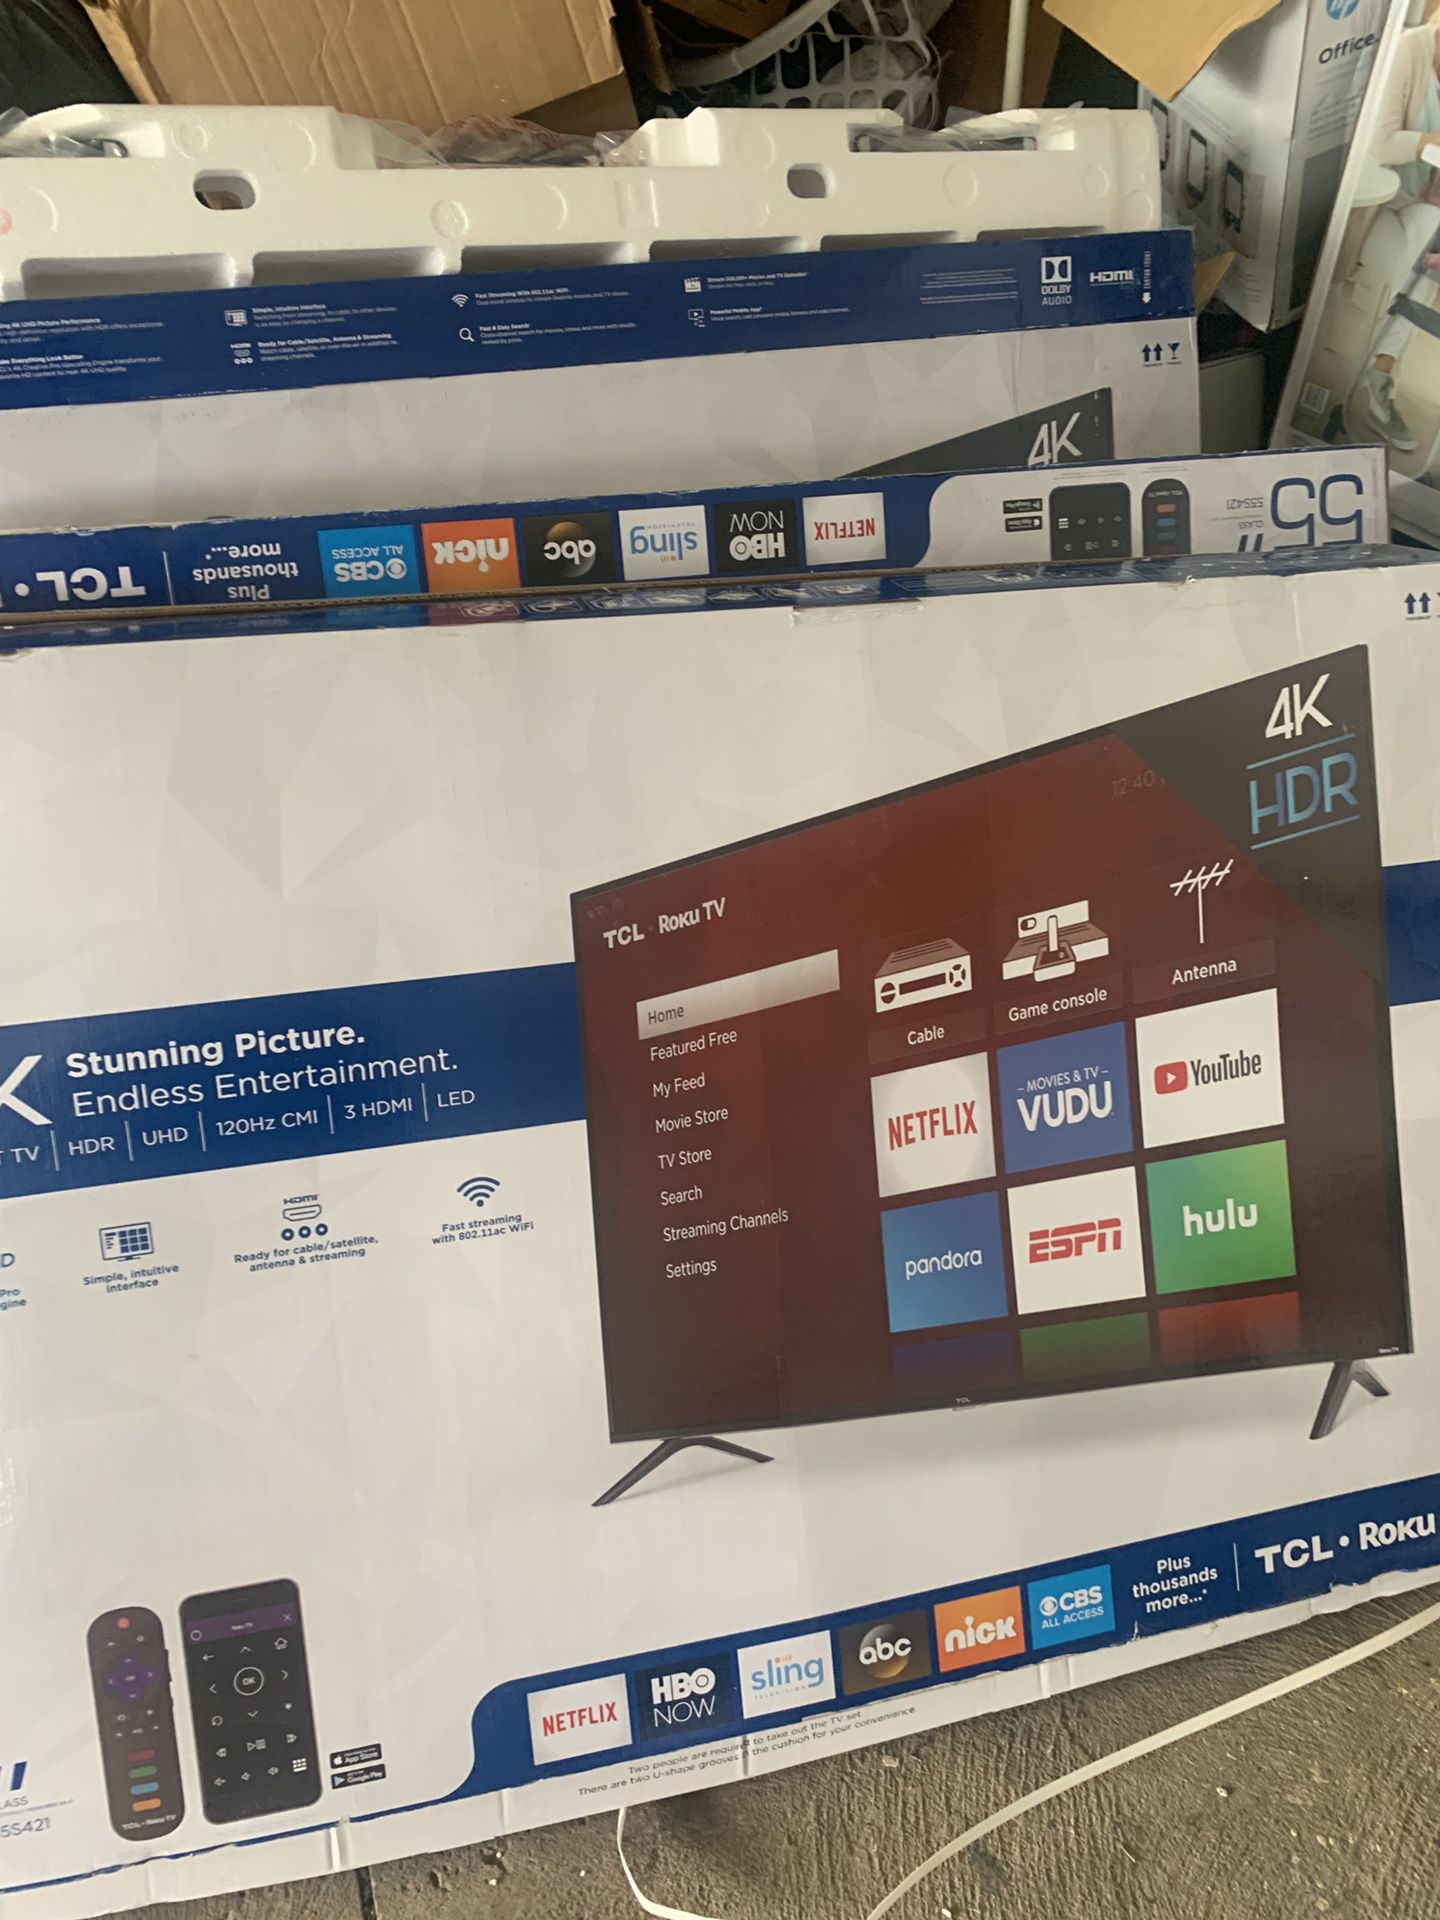 55” tcl , HD 4K , Dolby roko smart tv brand new in the box